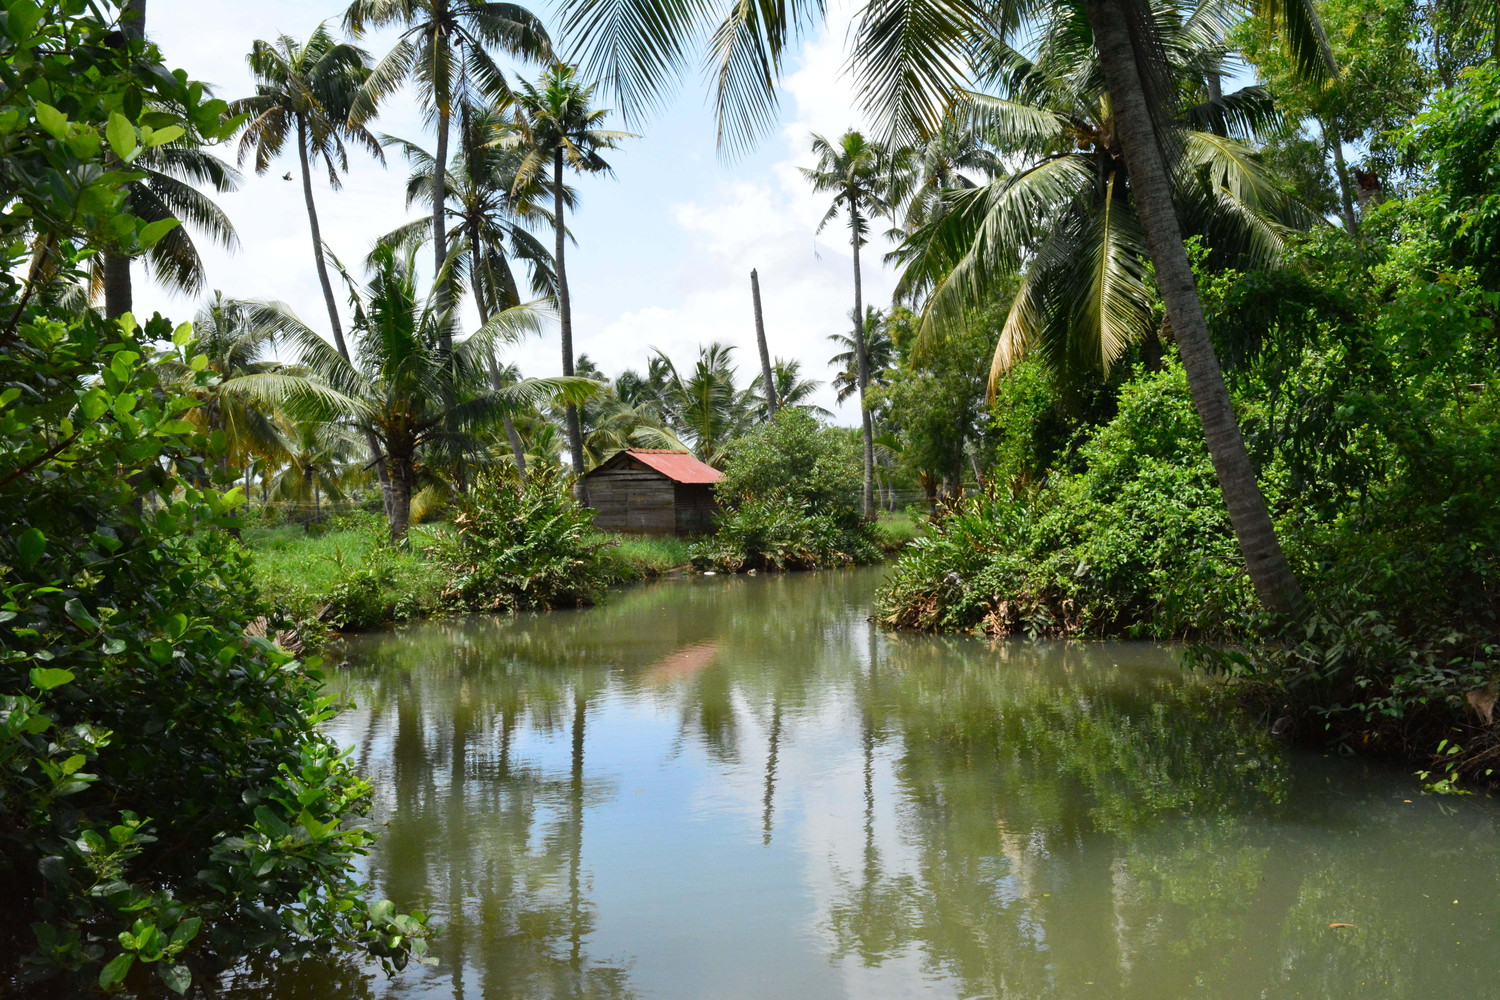 Backwaters surrounded by trees and a small wooden house among the trees